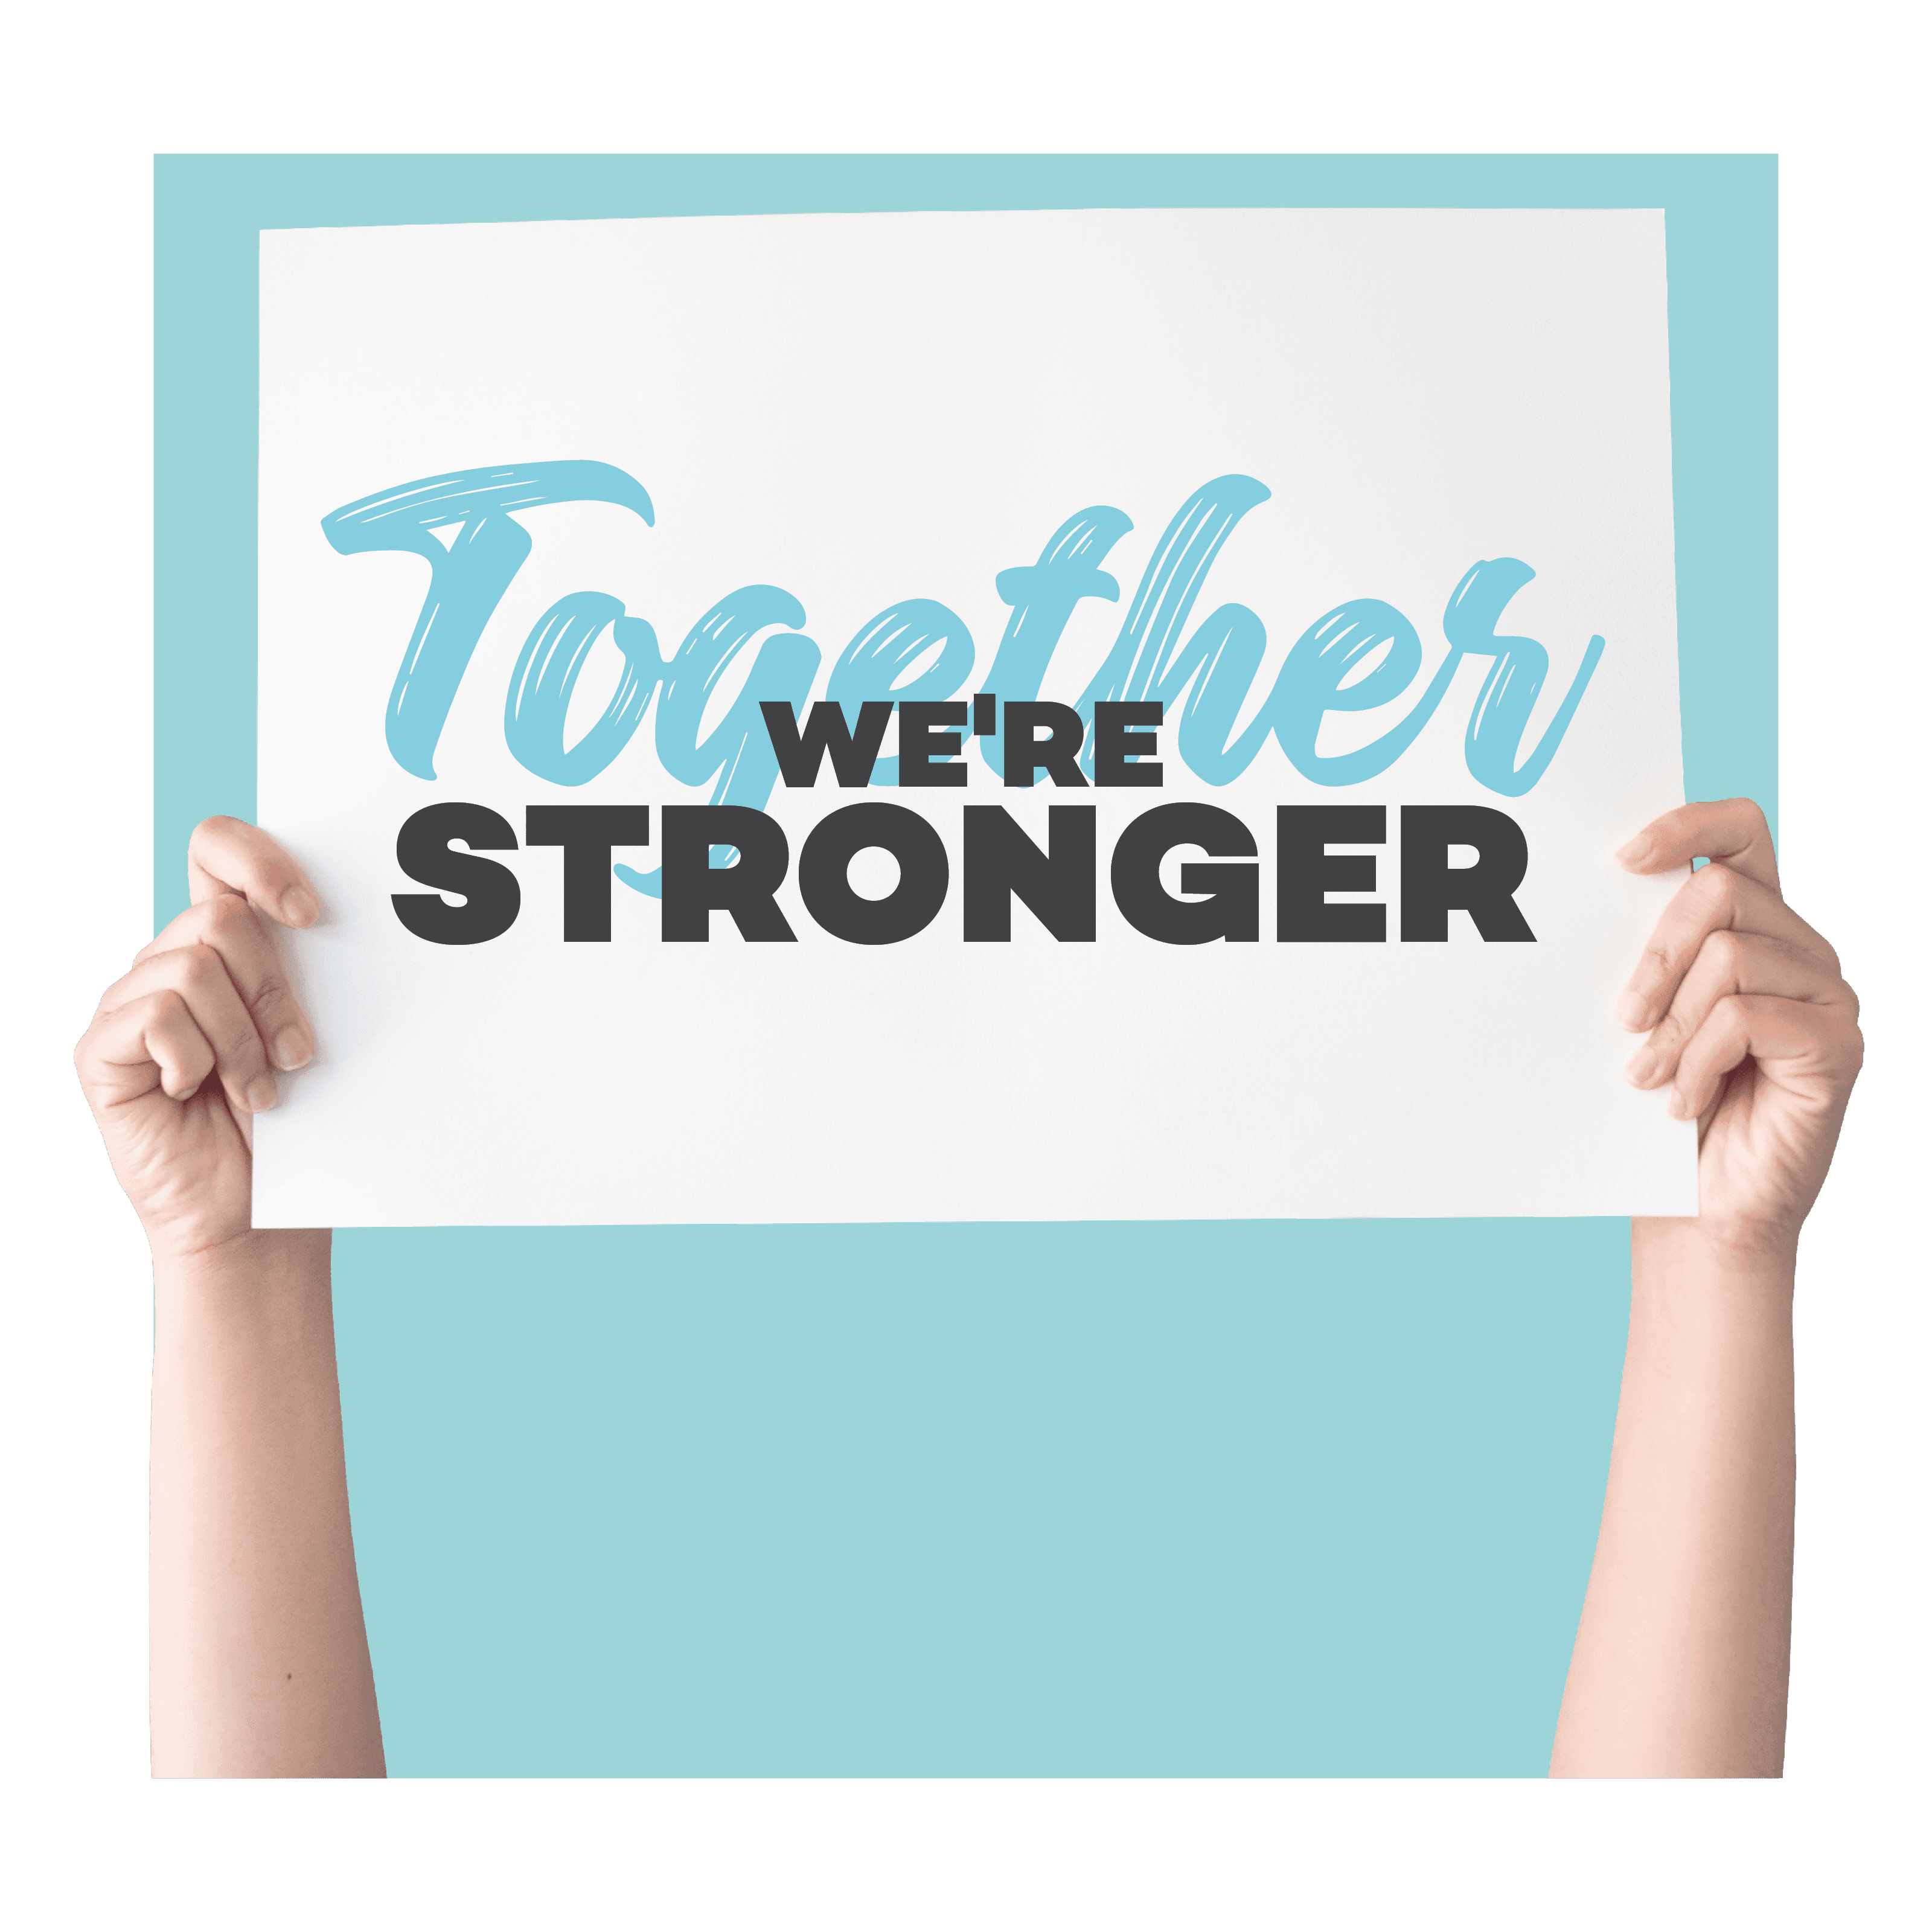 Together we're stronger August banner